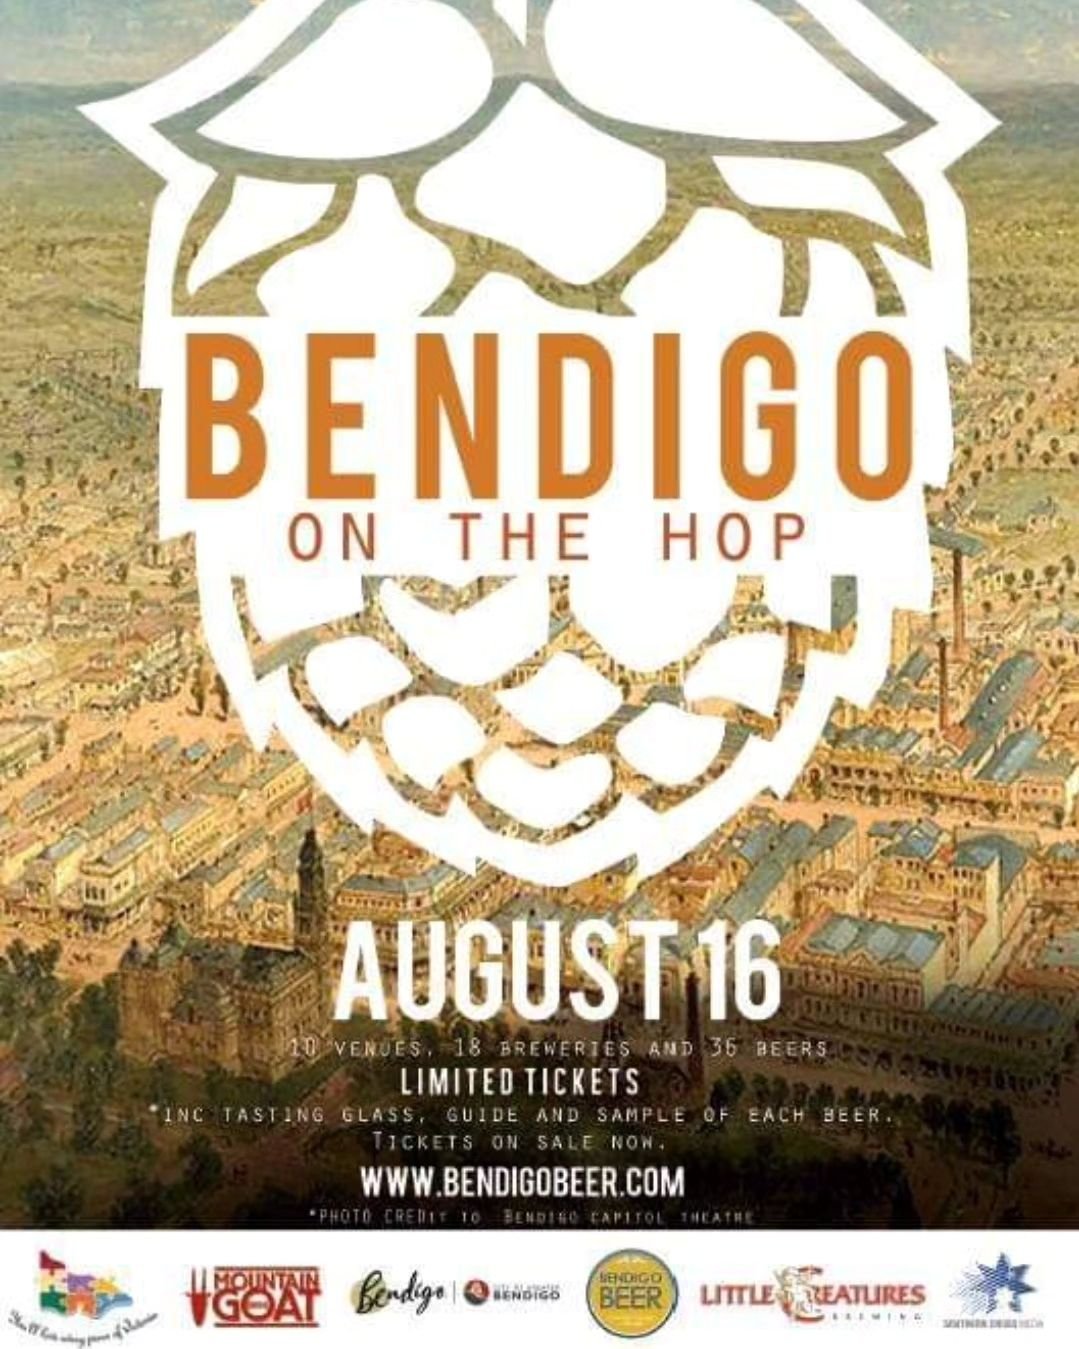 *FLASHBACK* 2014 Poster for our very first Bendigo On The Hop. Who was there?